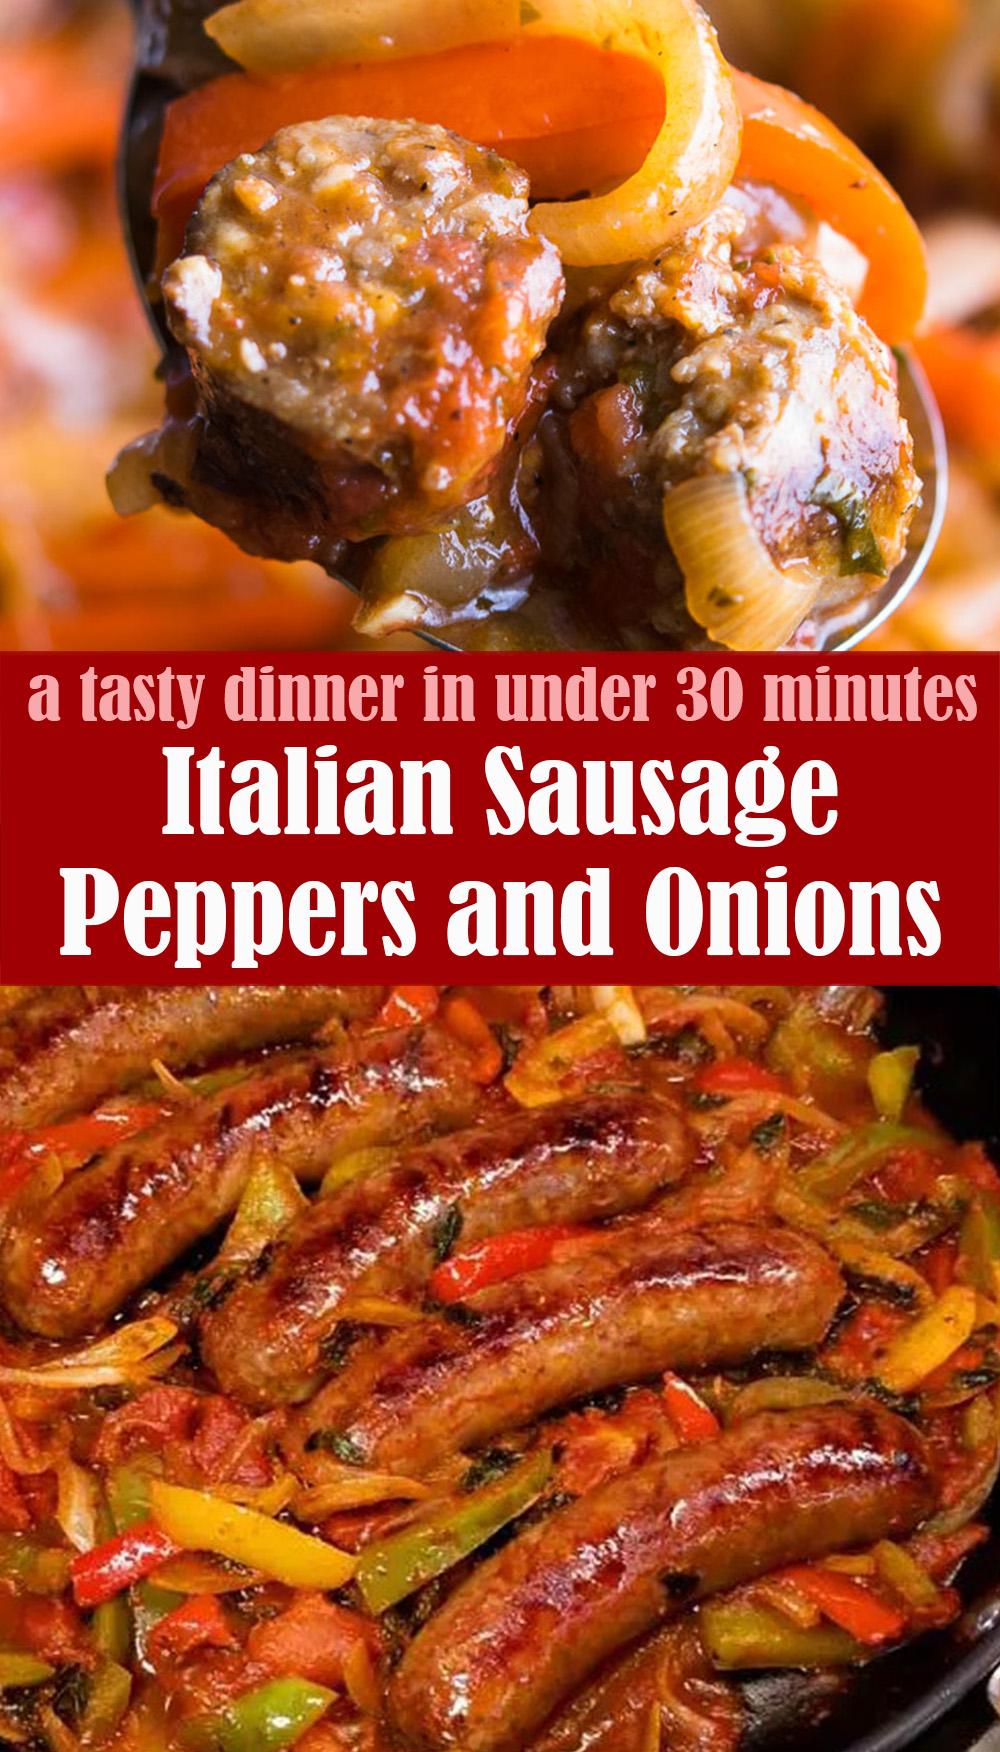 Easy Italian Sausage Peppers and Onions